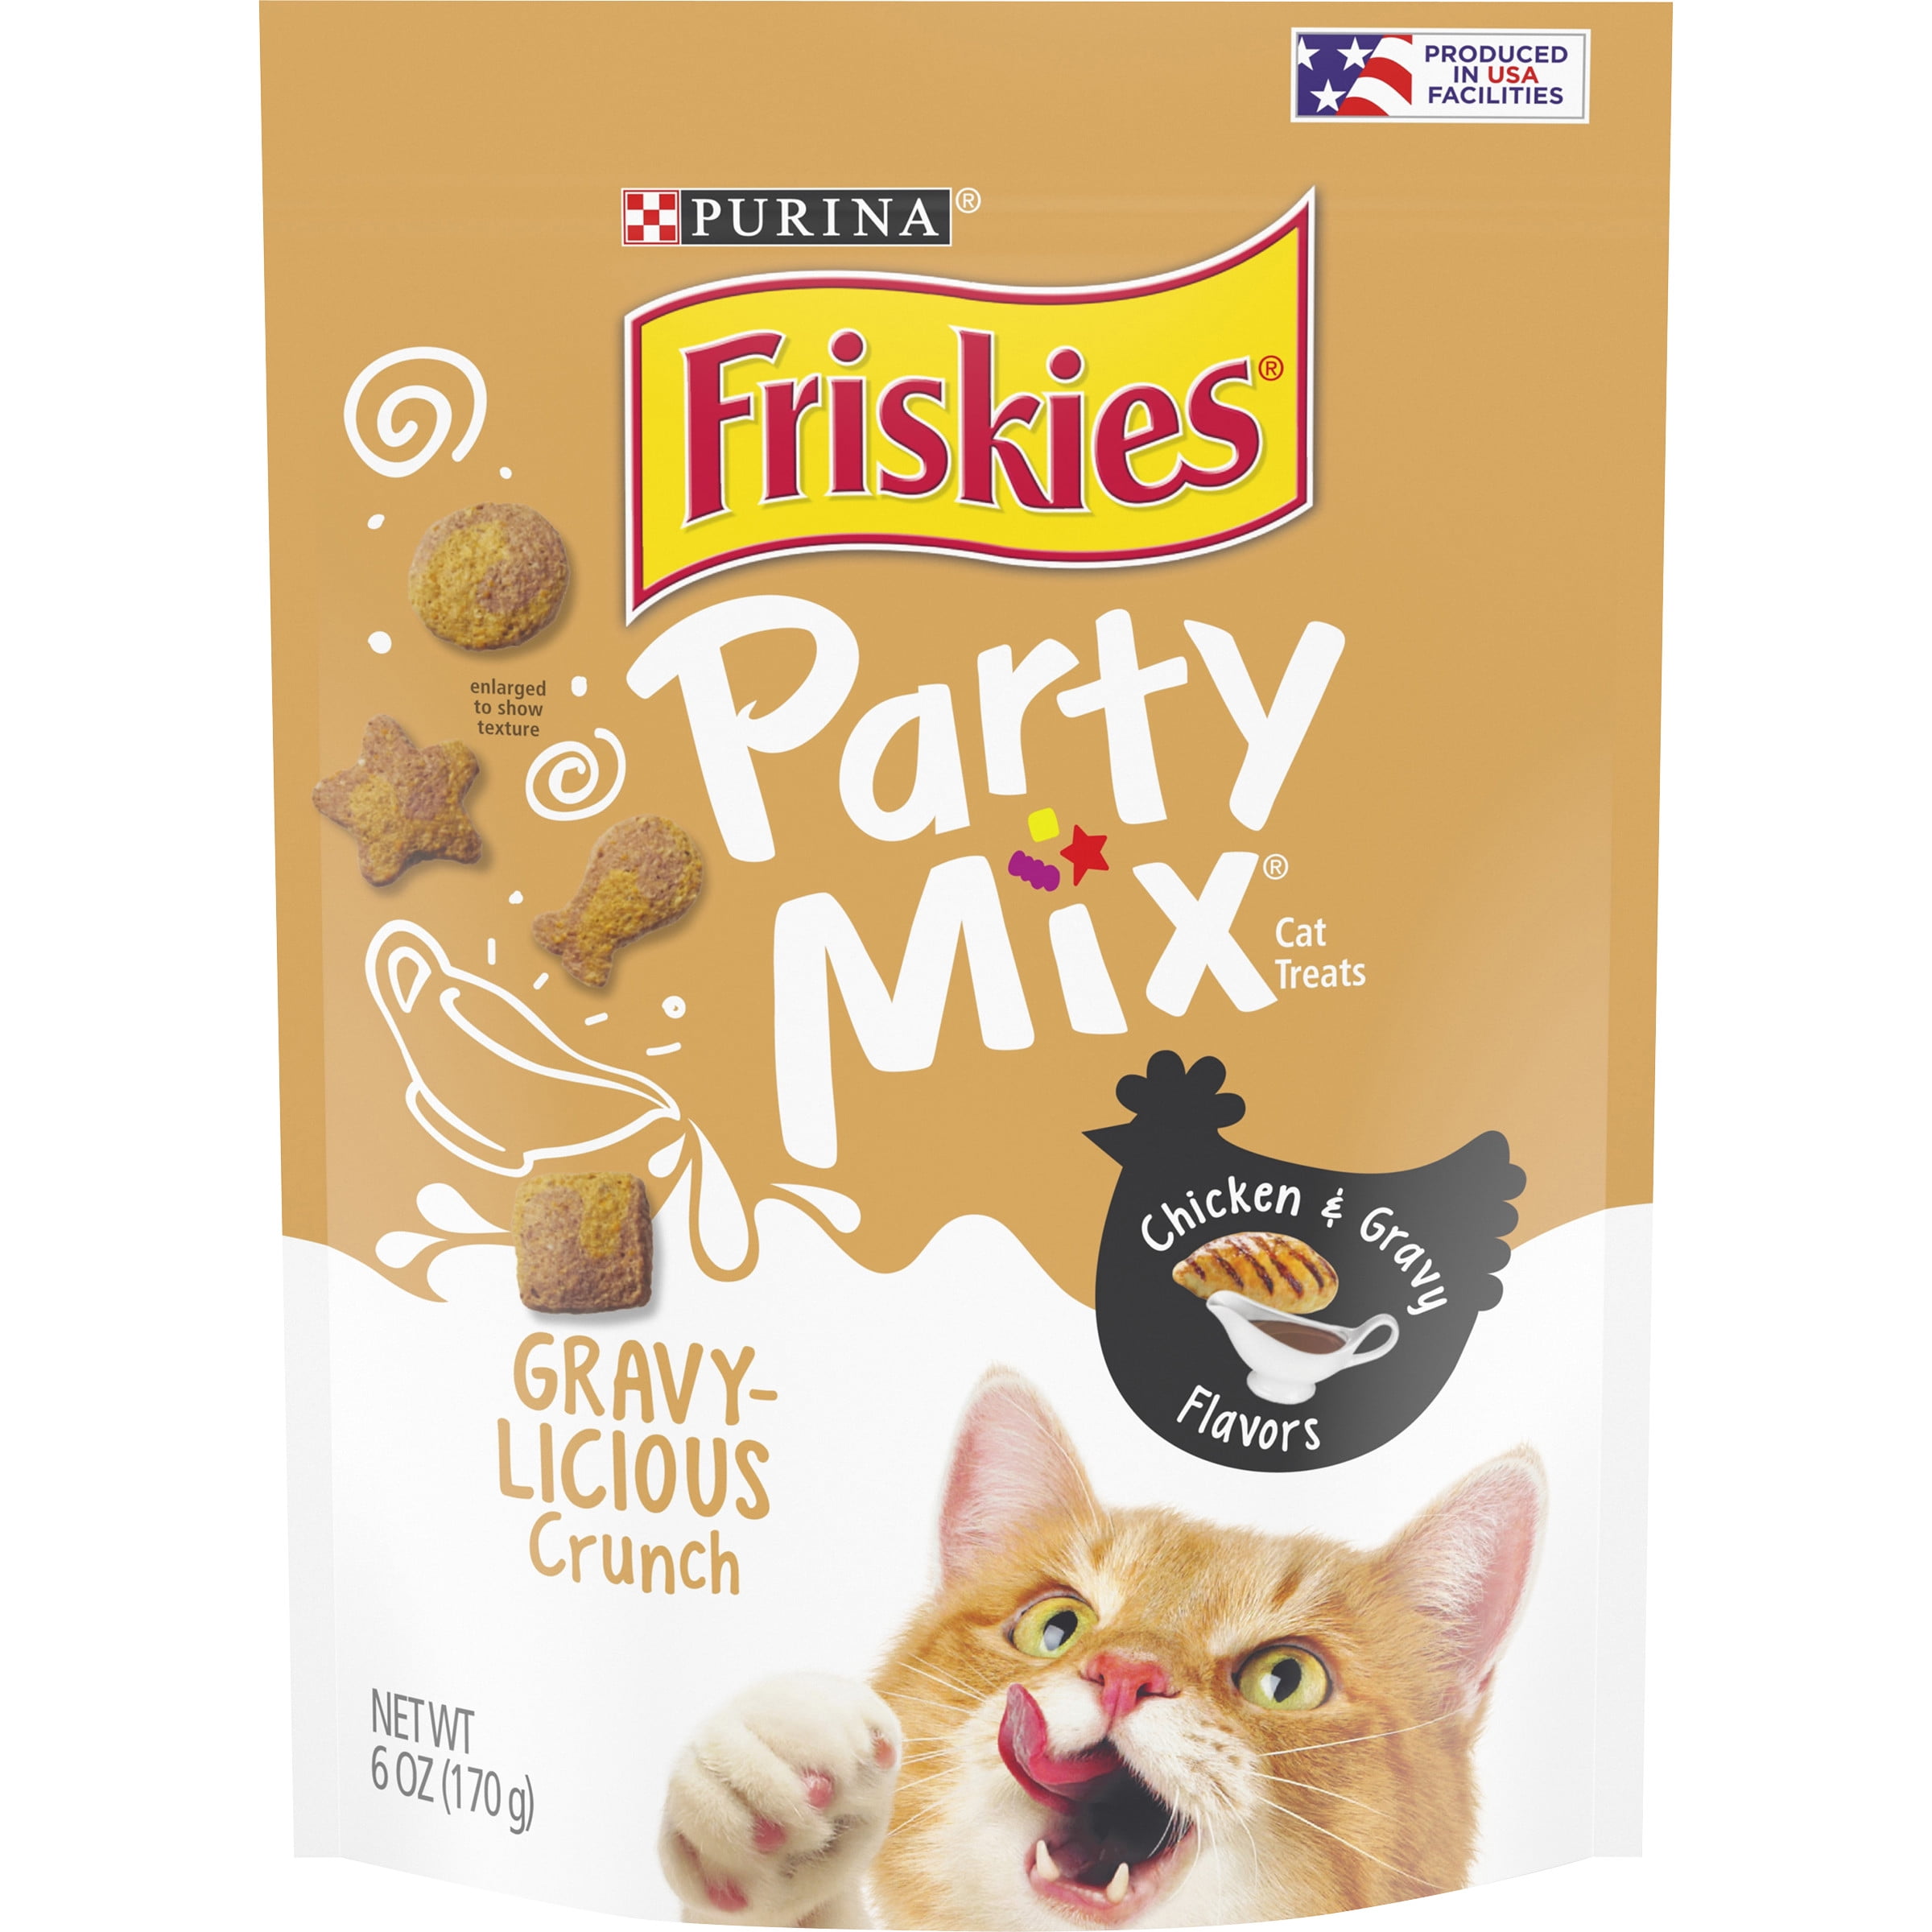 Purina Friskies Party Mix Chicken and Gravy Flavor for Cats, 6 oz Bags (6 Pack)